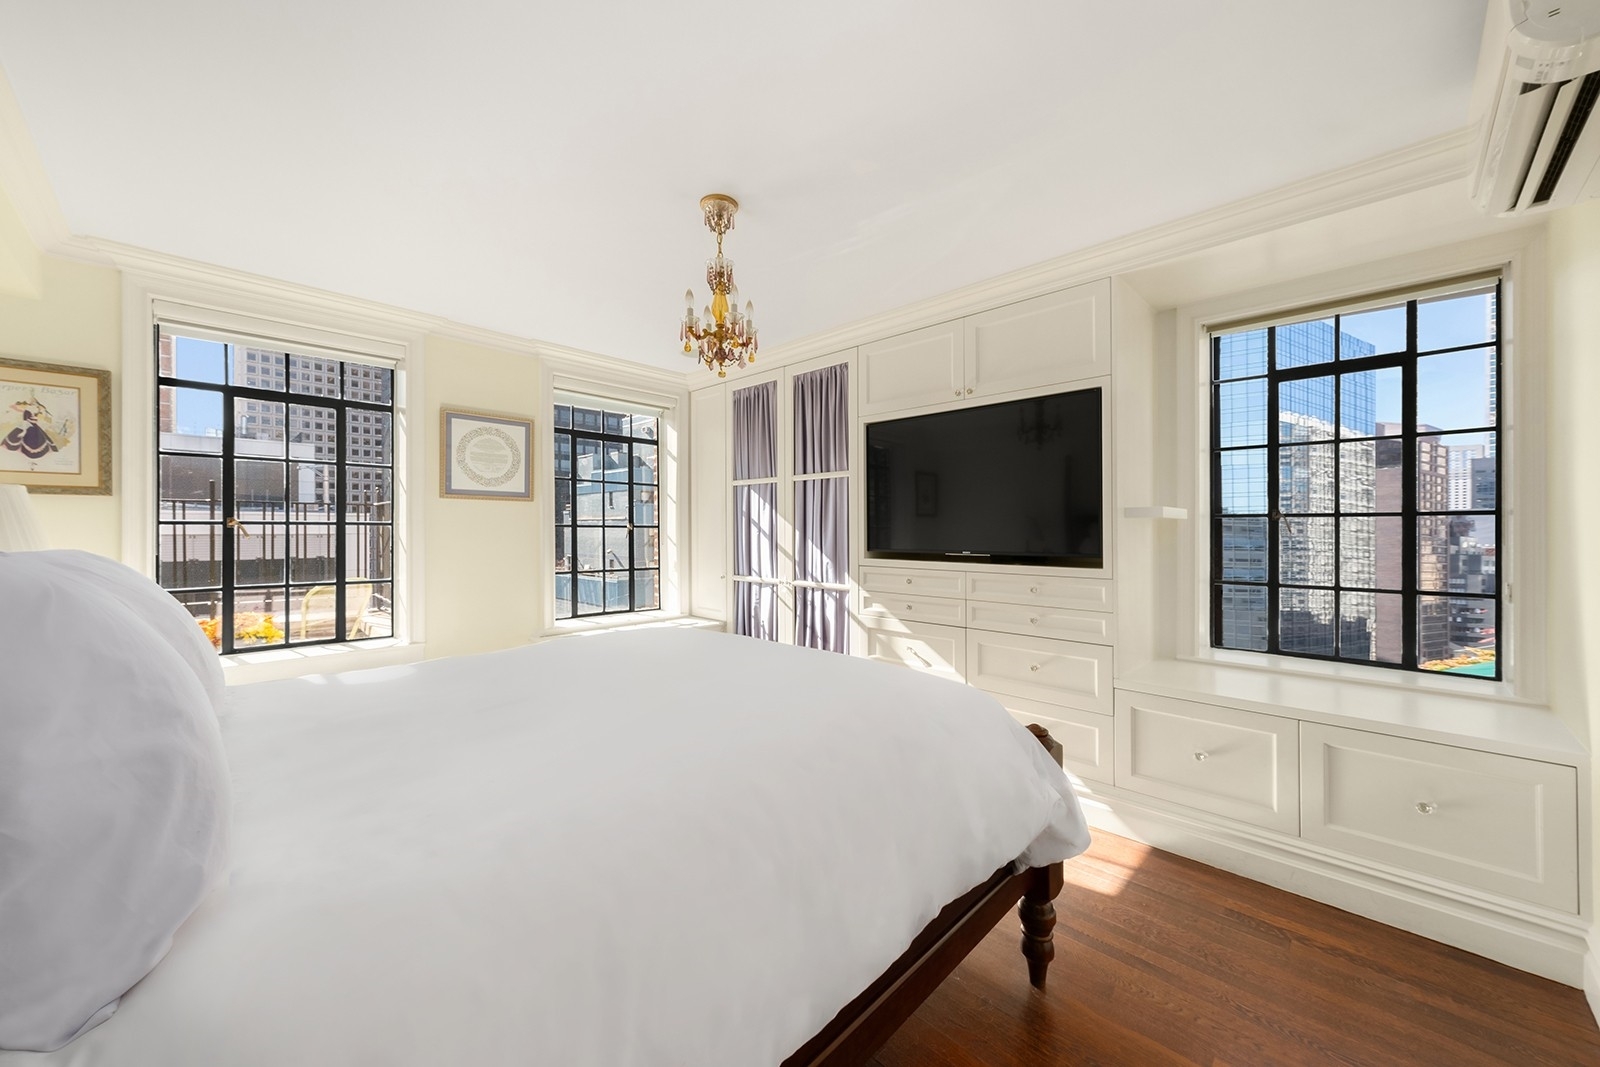 6. Co-op Properties for Sale at 227 E 57TH ST, 19B Midtown East, New York, New York 10022